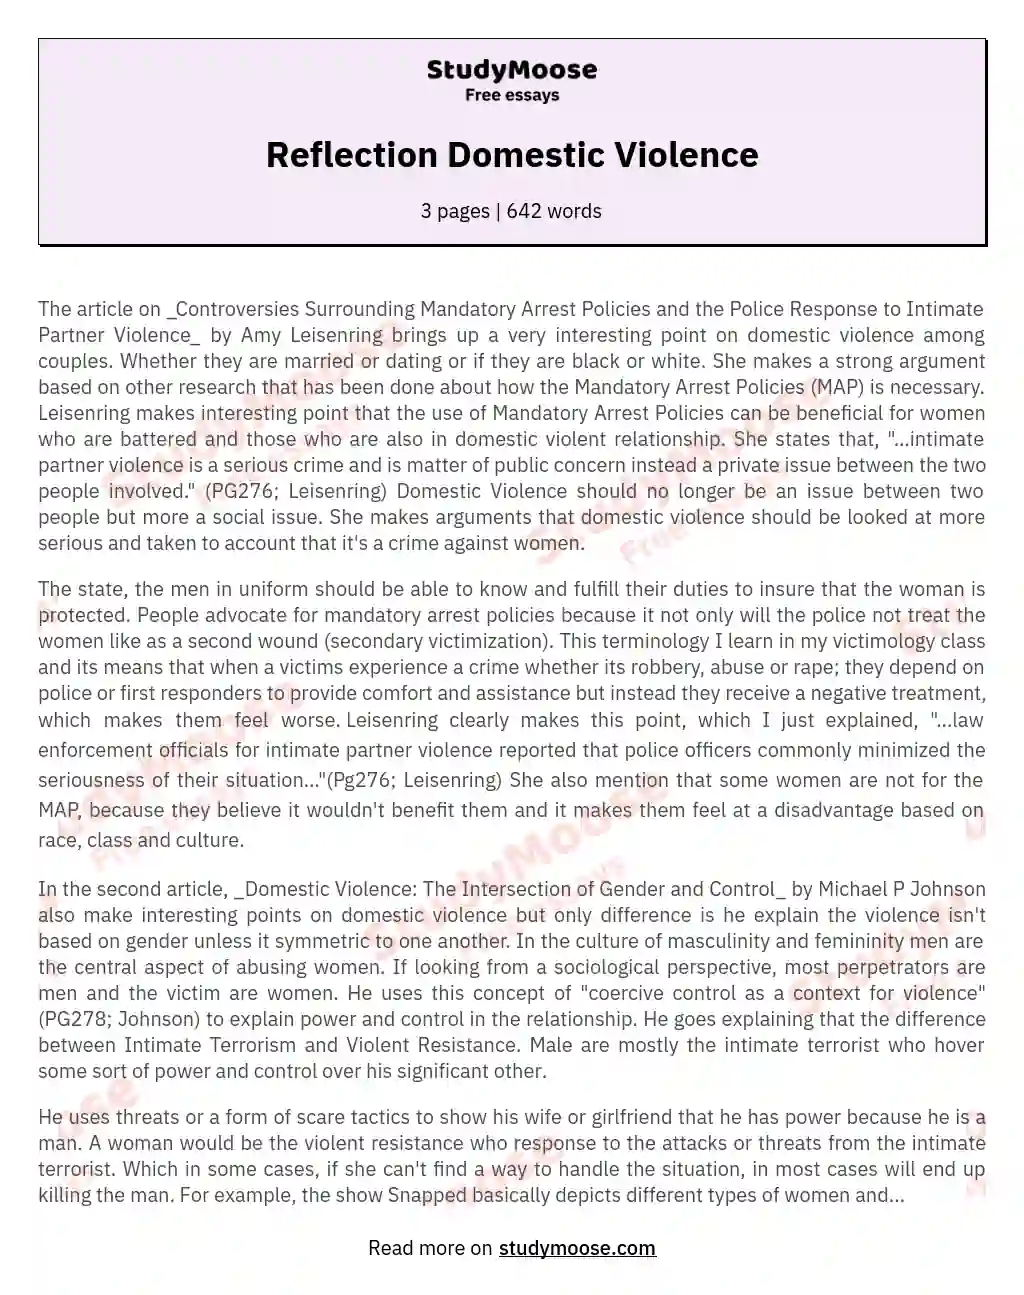 short and easy essay on domestic violence